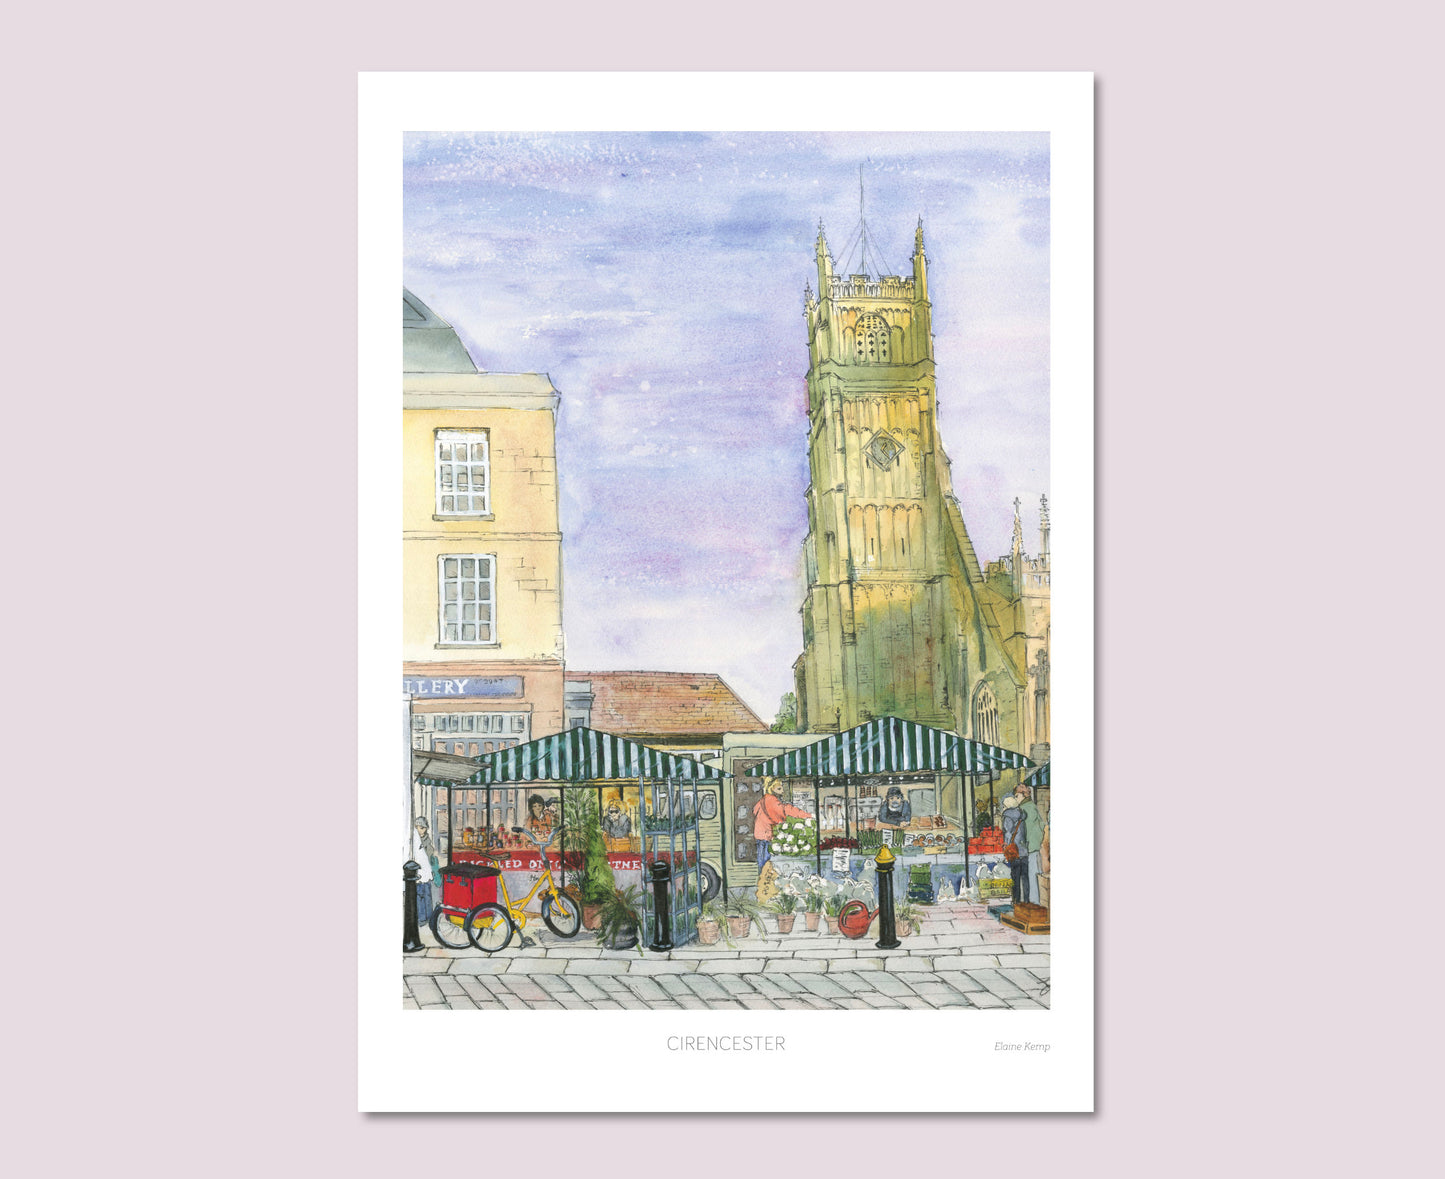 Cirencester Market and Church Watercolour Print